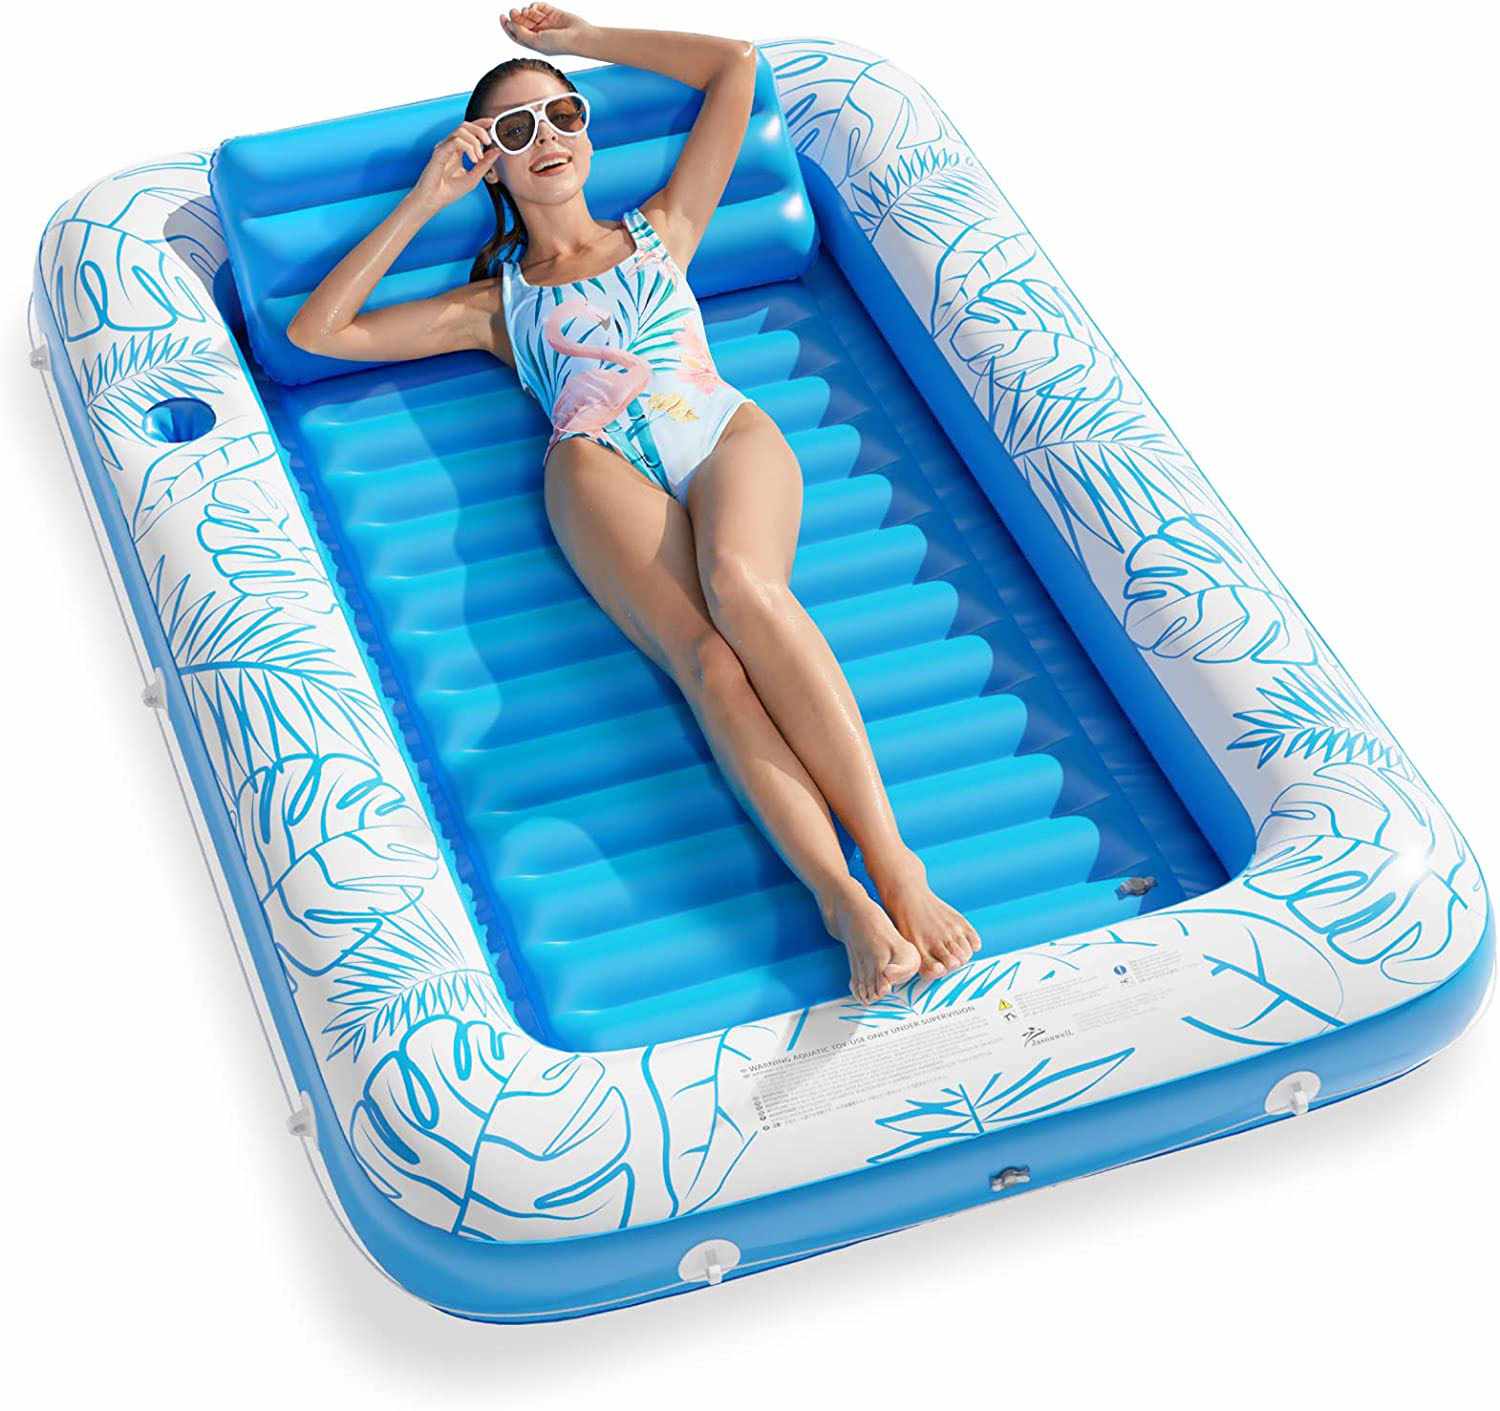 Jasonwell 4 in 1 Inflatable Lounger Float